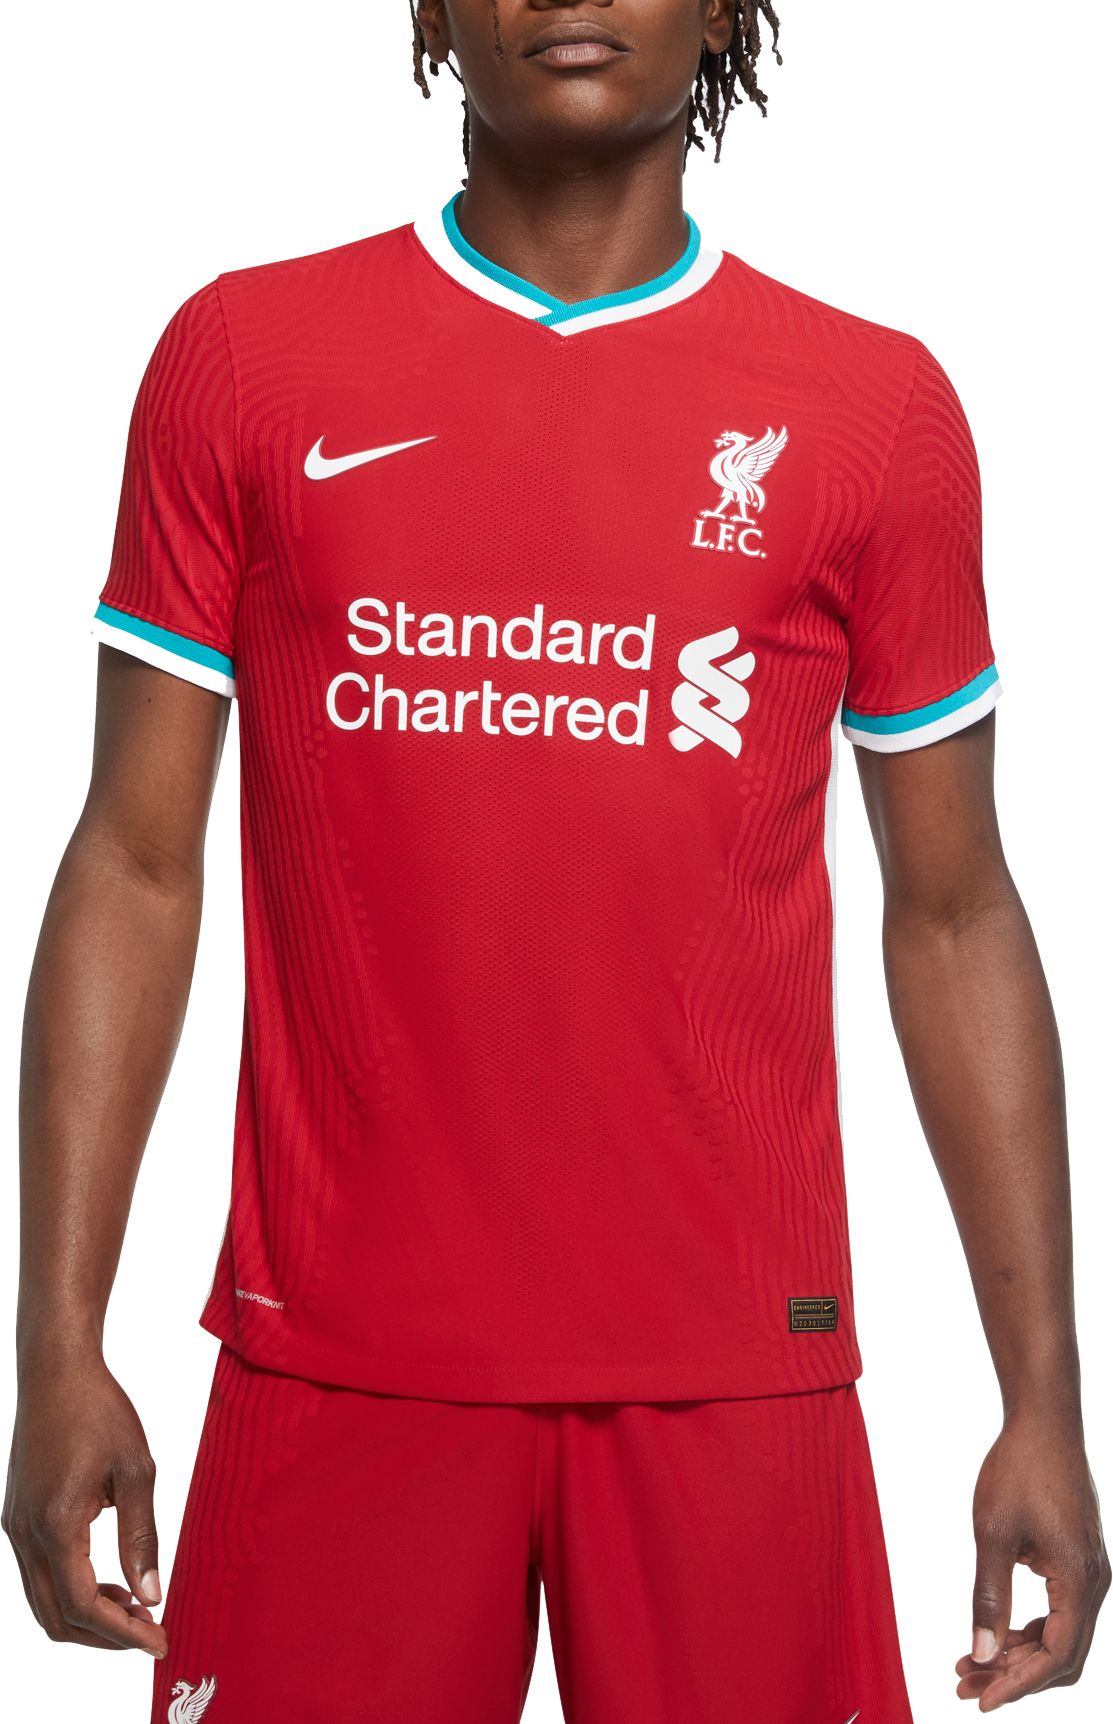 liverpool jersey authentic